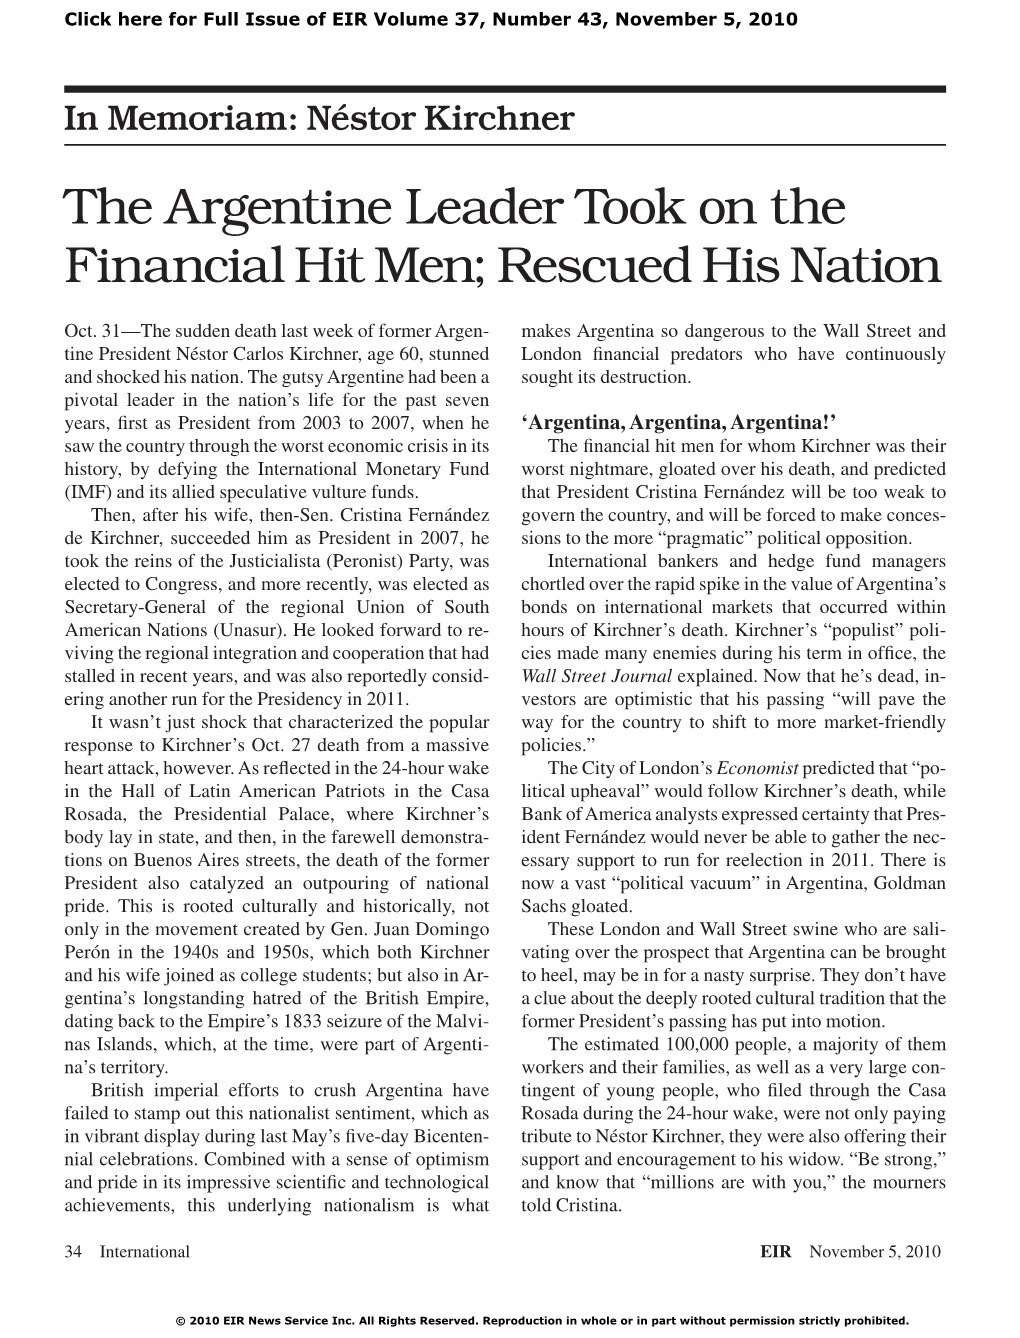 In Memoriam—Néstor Kirchner: the Argentine Leader Took on the Financial Hit Men; Rescued His Nation